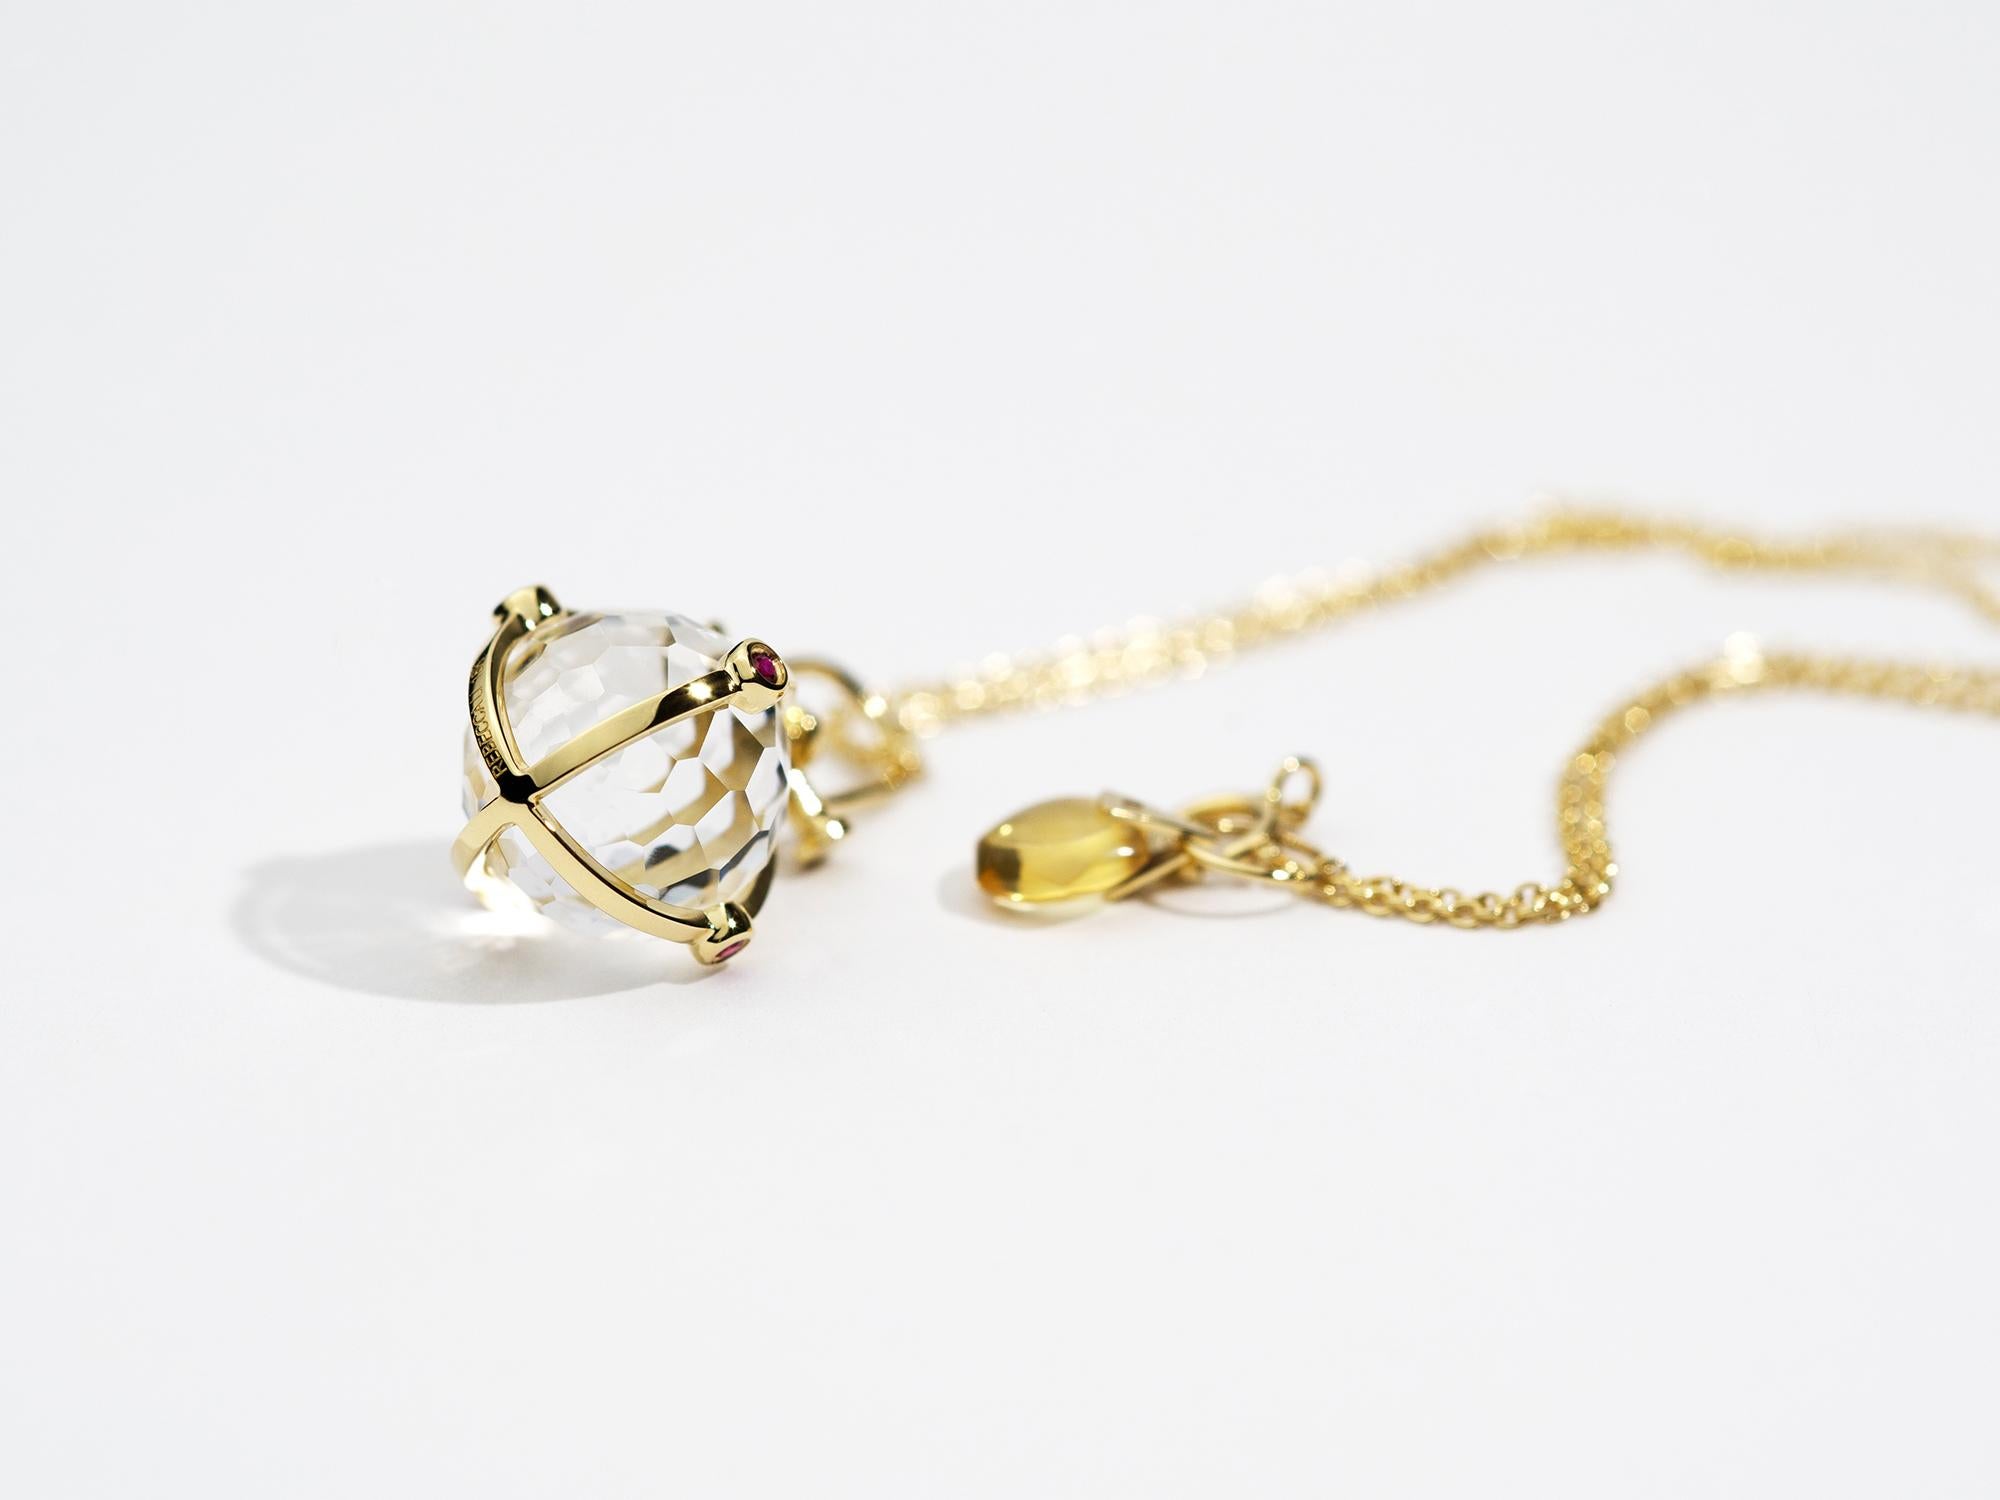 Rebecca Li designs sacred and mindfulness jewelry.

This elegant talisman pendant is from her Crystal Orb. The main design element used here is the sacred geometry circle. It represents oneness.

This beautiful 18K gold pendant is a talisman for